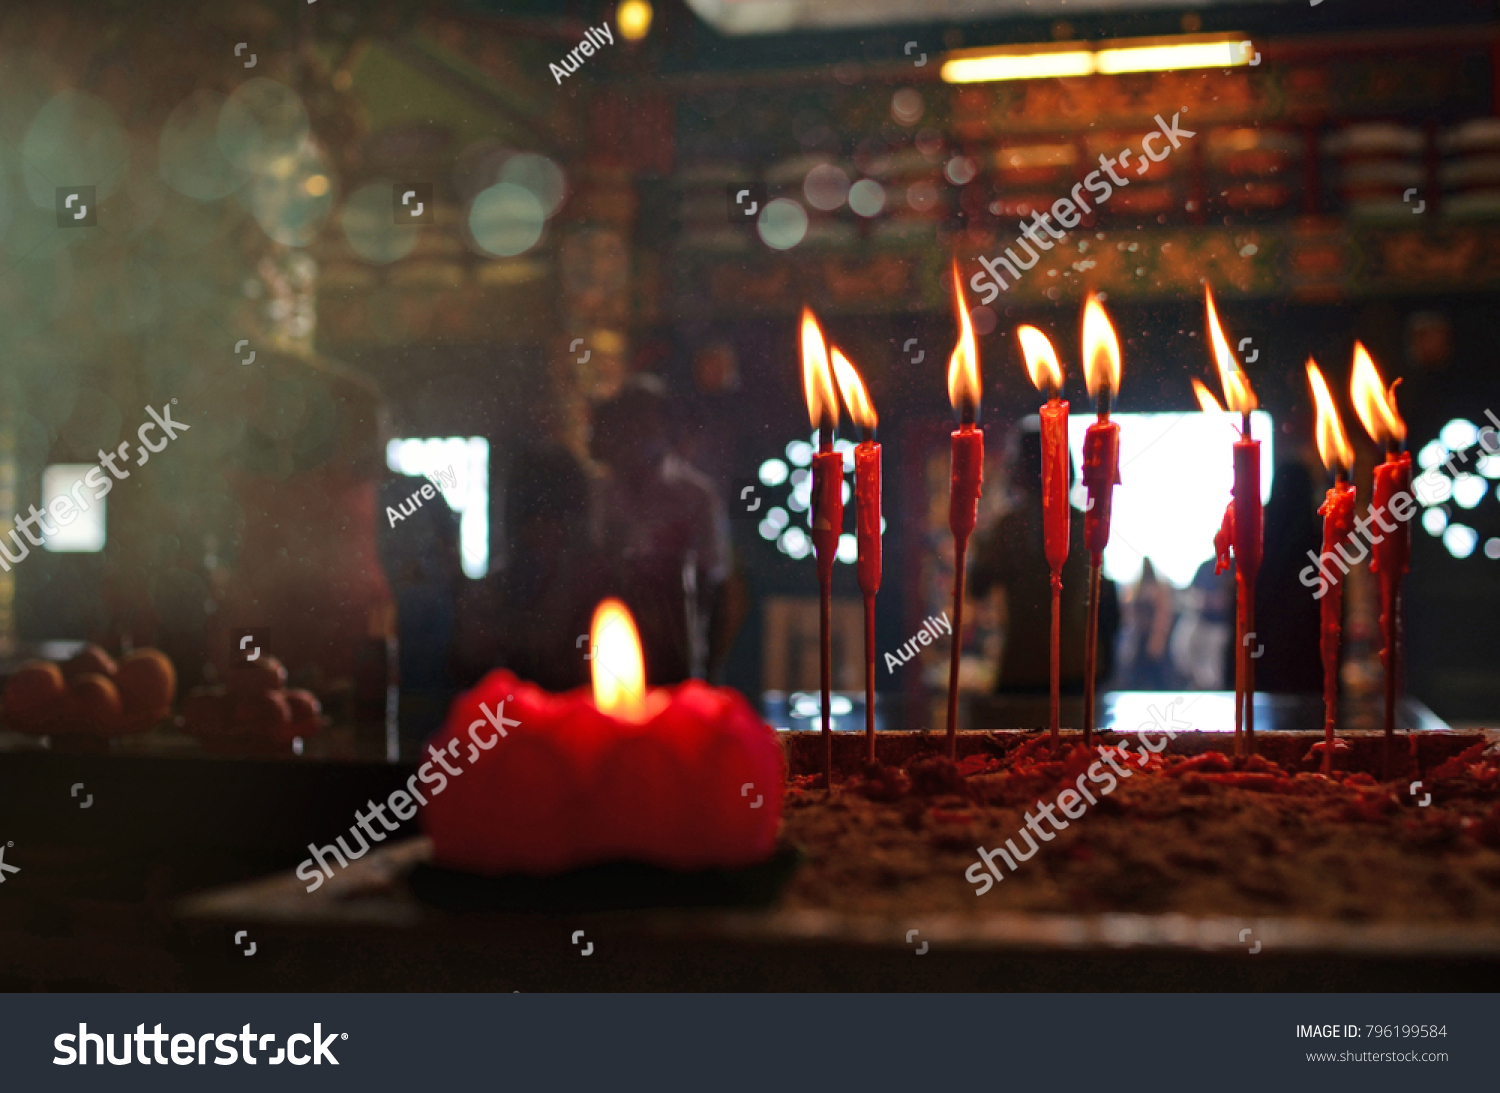 Burning red chinese candle in temple #796199584